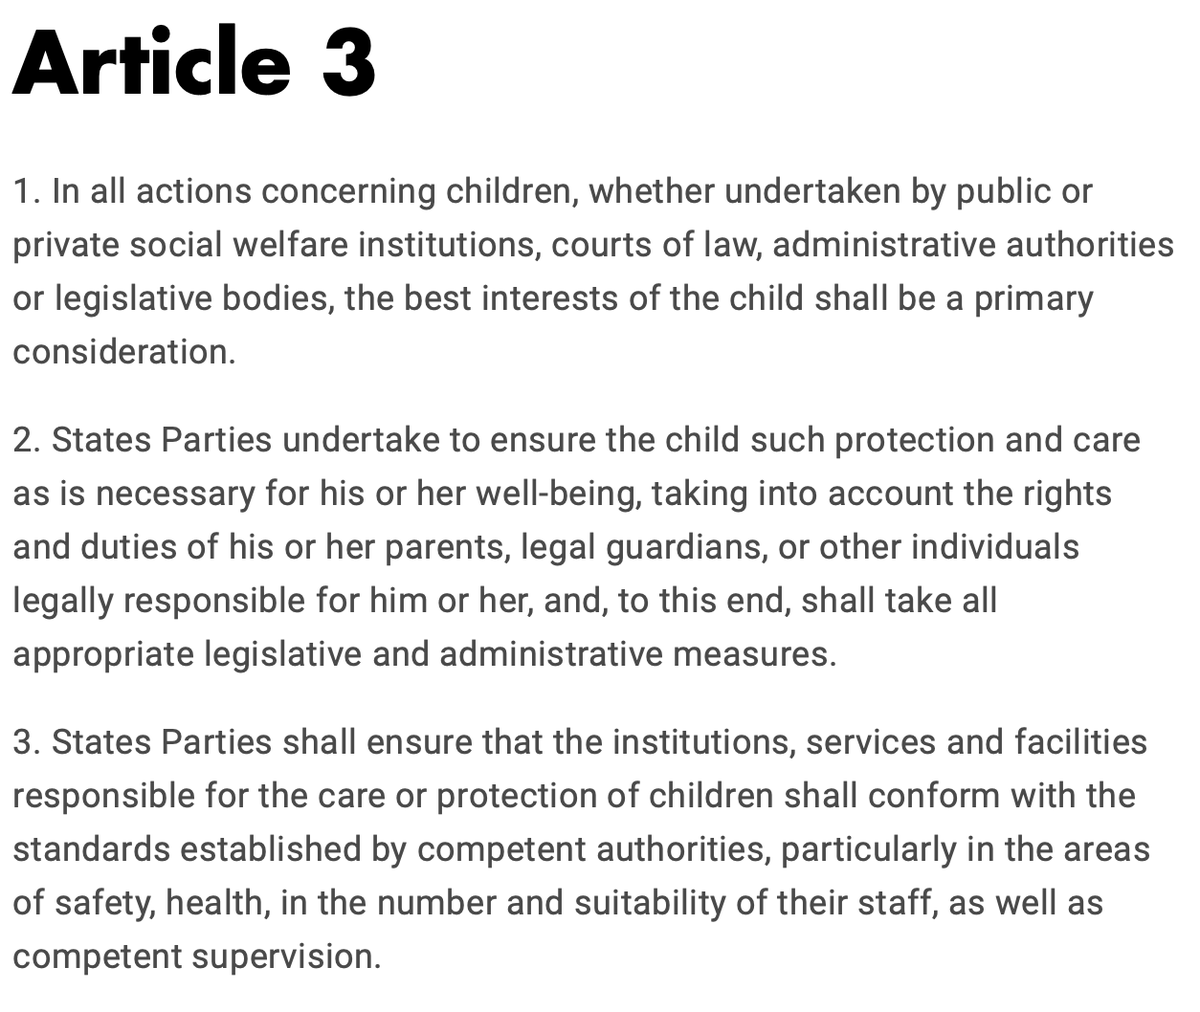 Article 3 of the Convention on the Rights of the Child (UNCRC) states that for social welfare institutions, the best interests of the child shall be a primary consideration.

They have not only failed in this but have actively enabled procedures against it.

10/16🧵